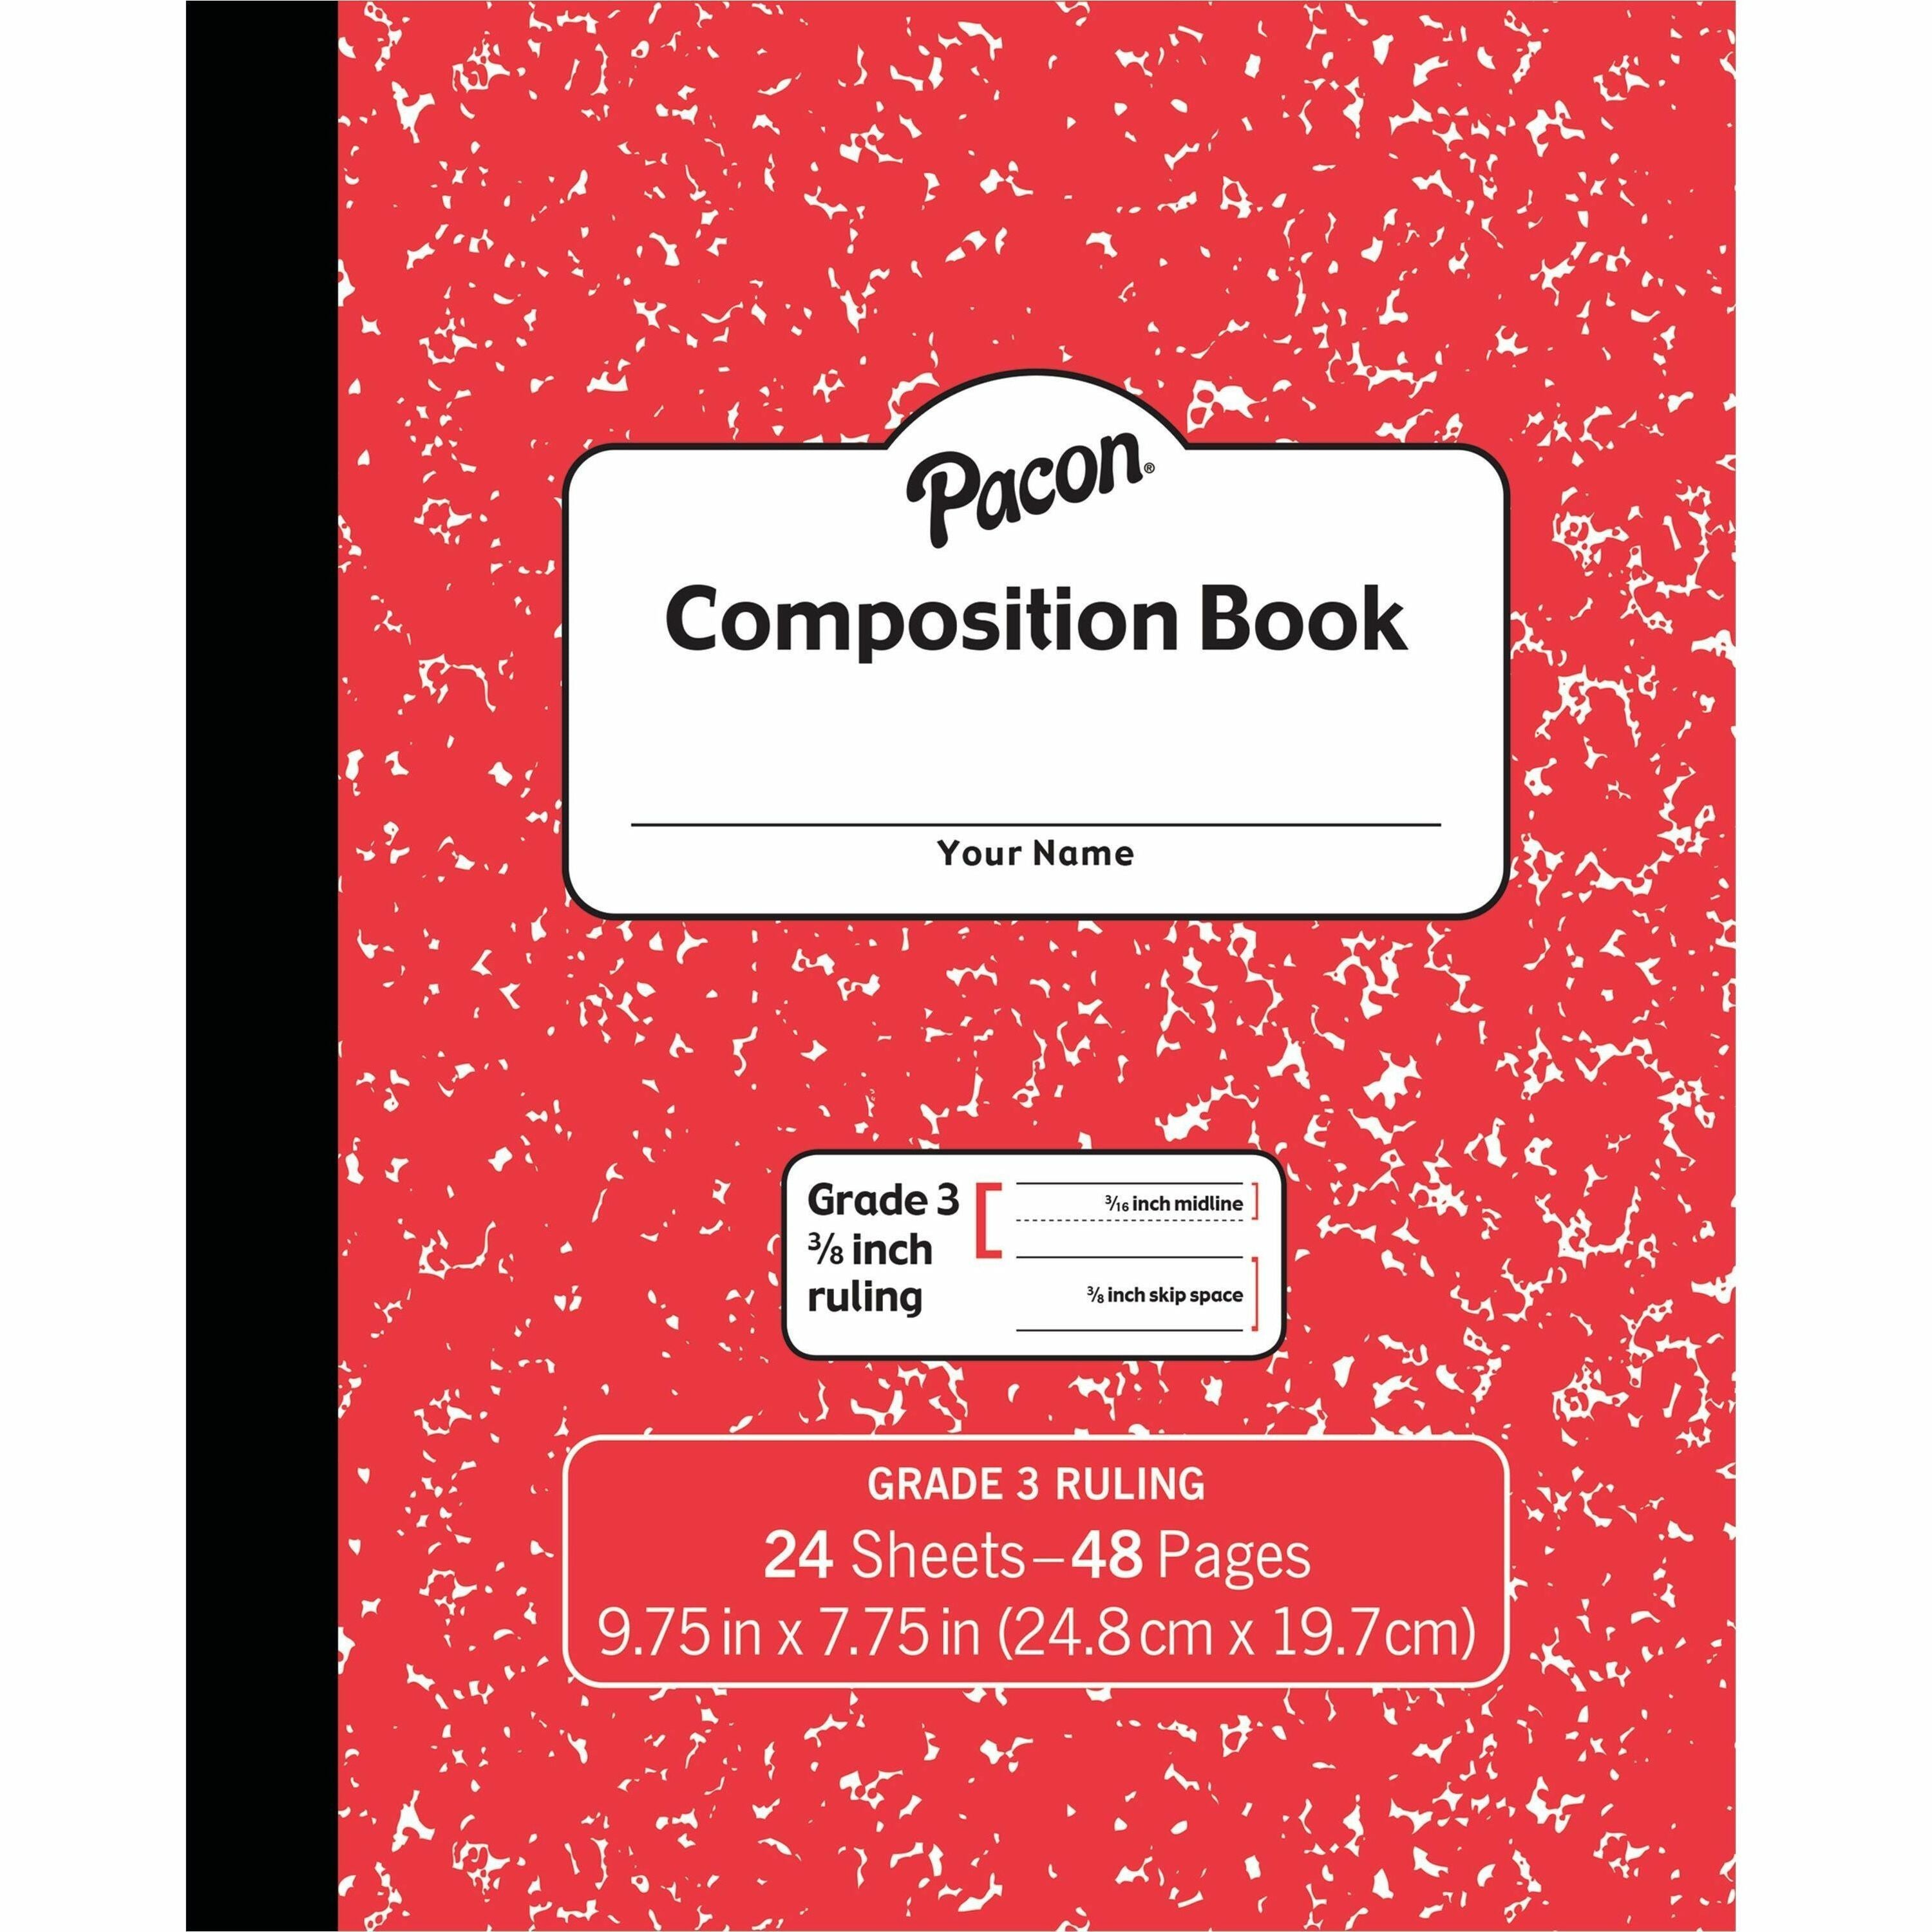 pacon-composition-book-24-sheets-48-pages-98-x-75-red-marble-cover-durable-cover-soft-cover-1-each_pacpmmk37139 - 1